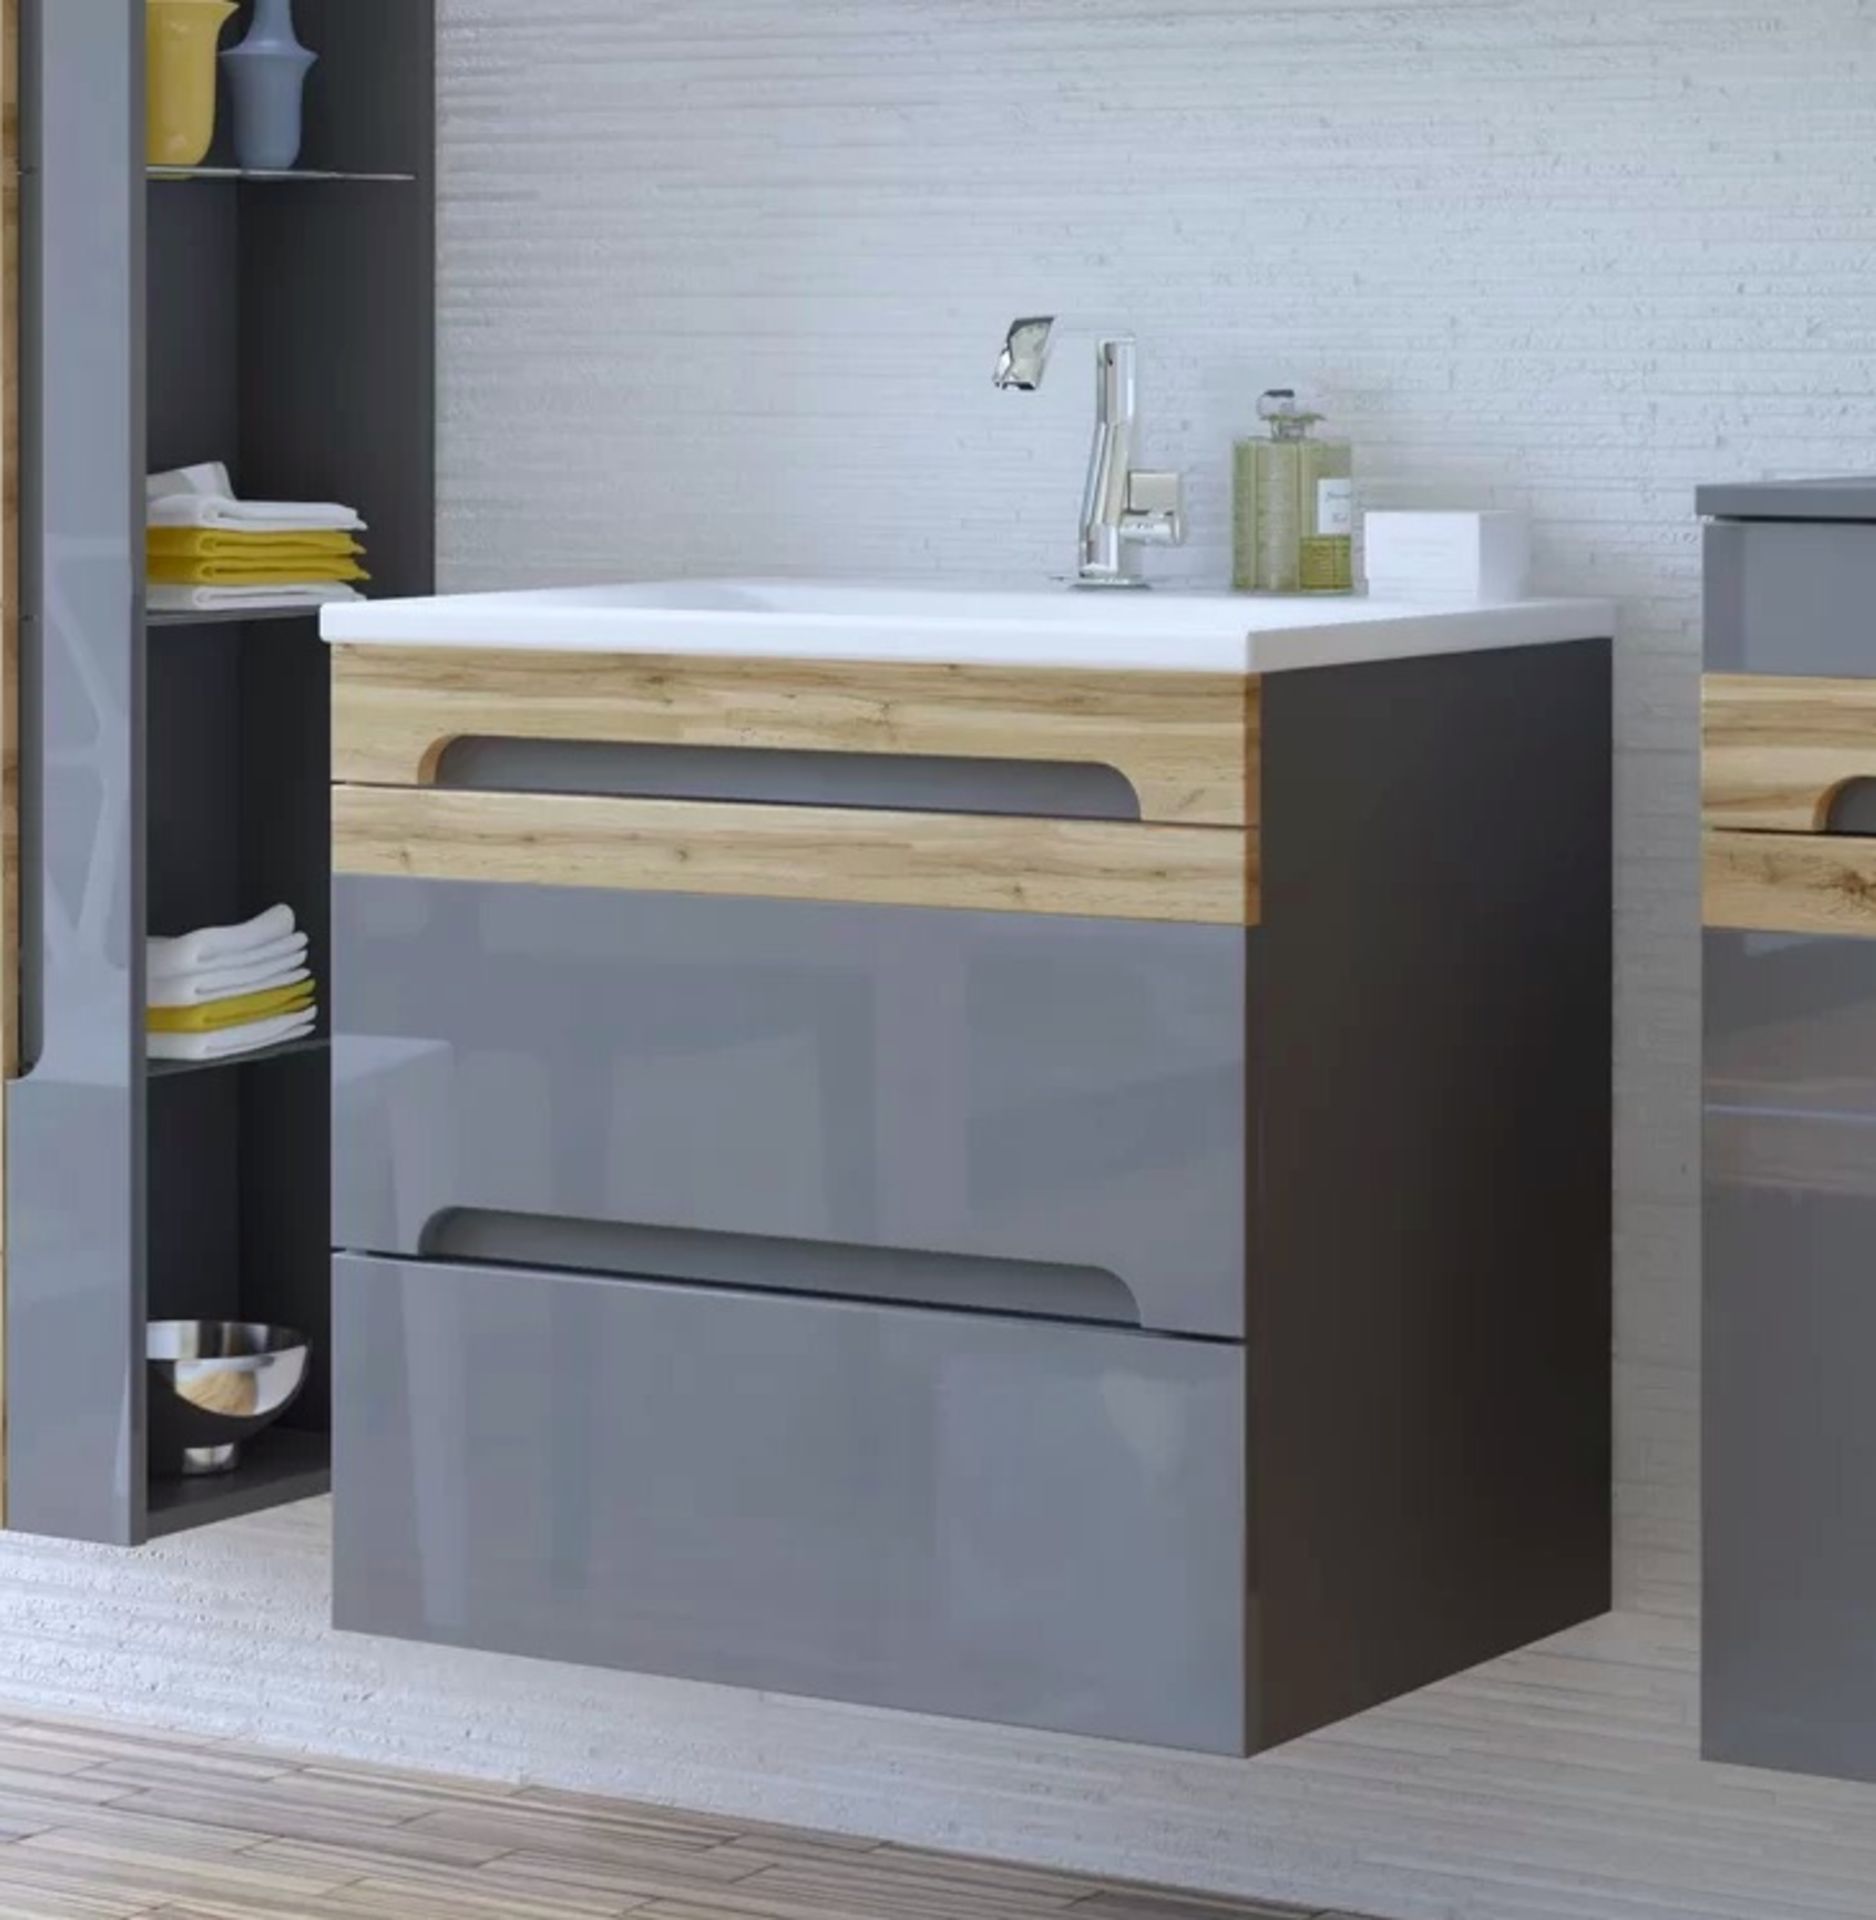 States Wall Mount Vanity UnitThe bathroom furniture collection is a perfect option for those who